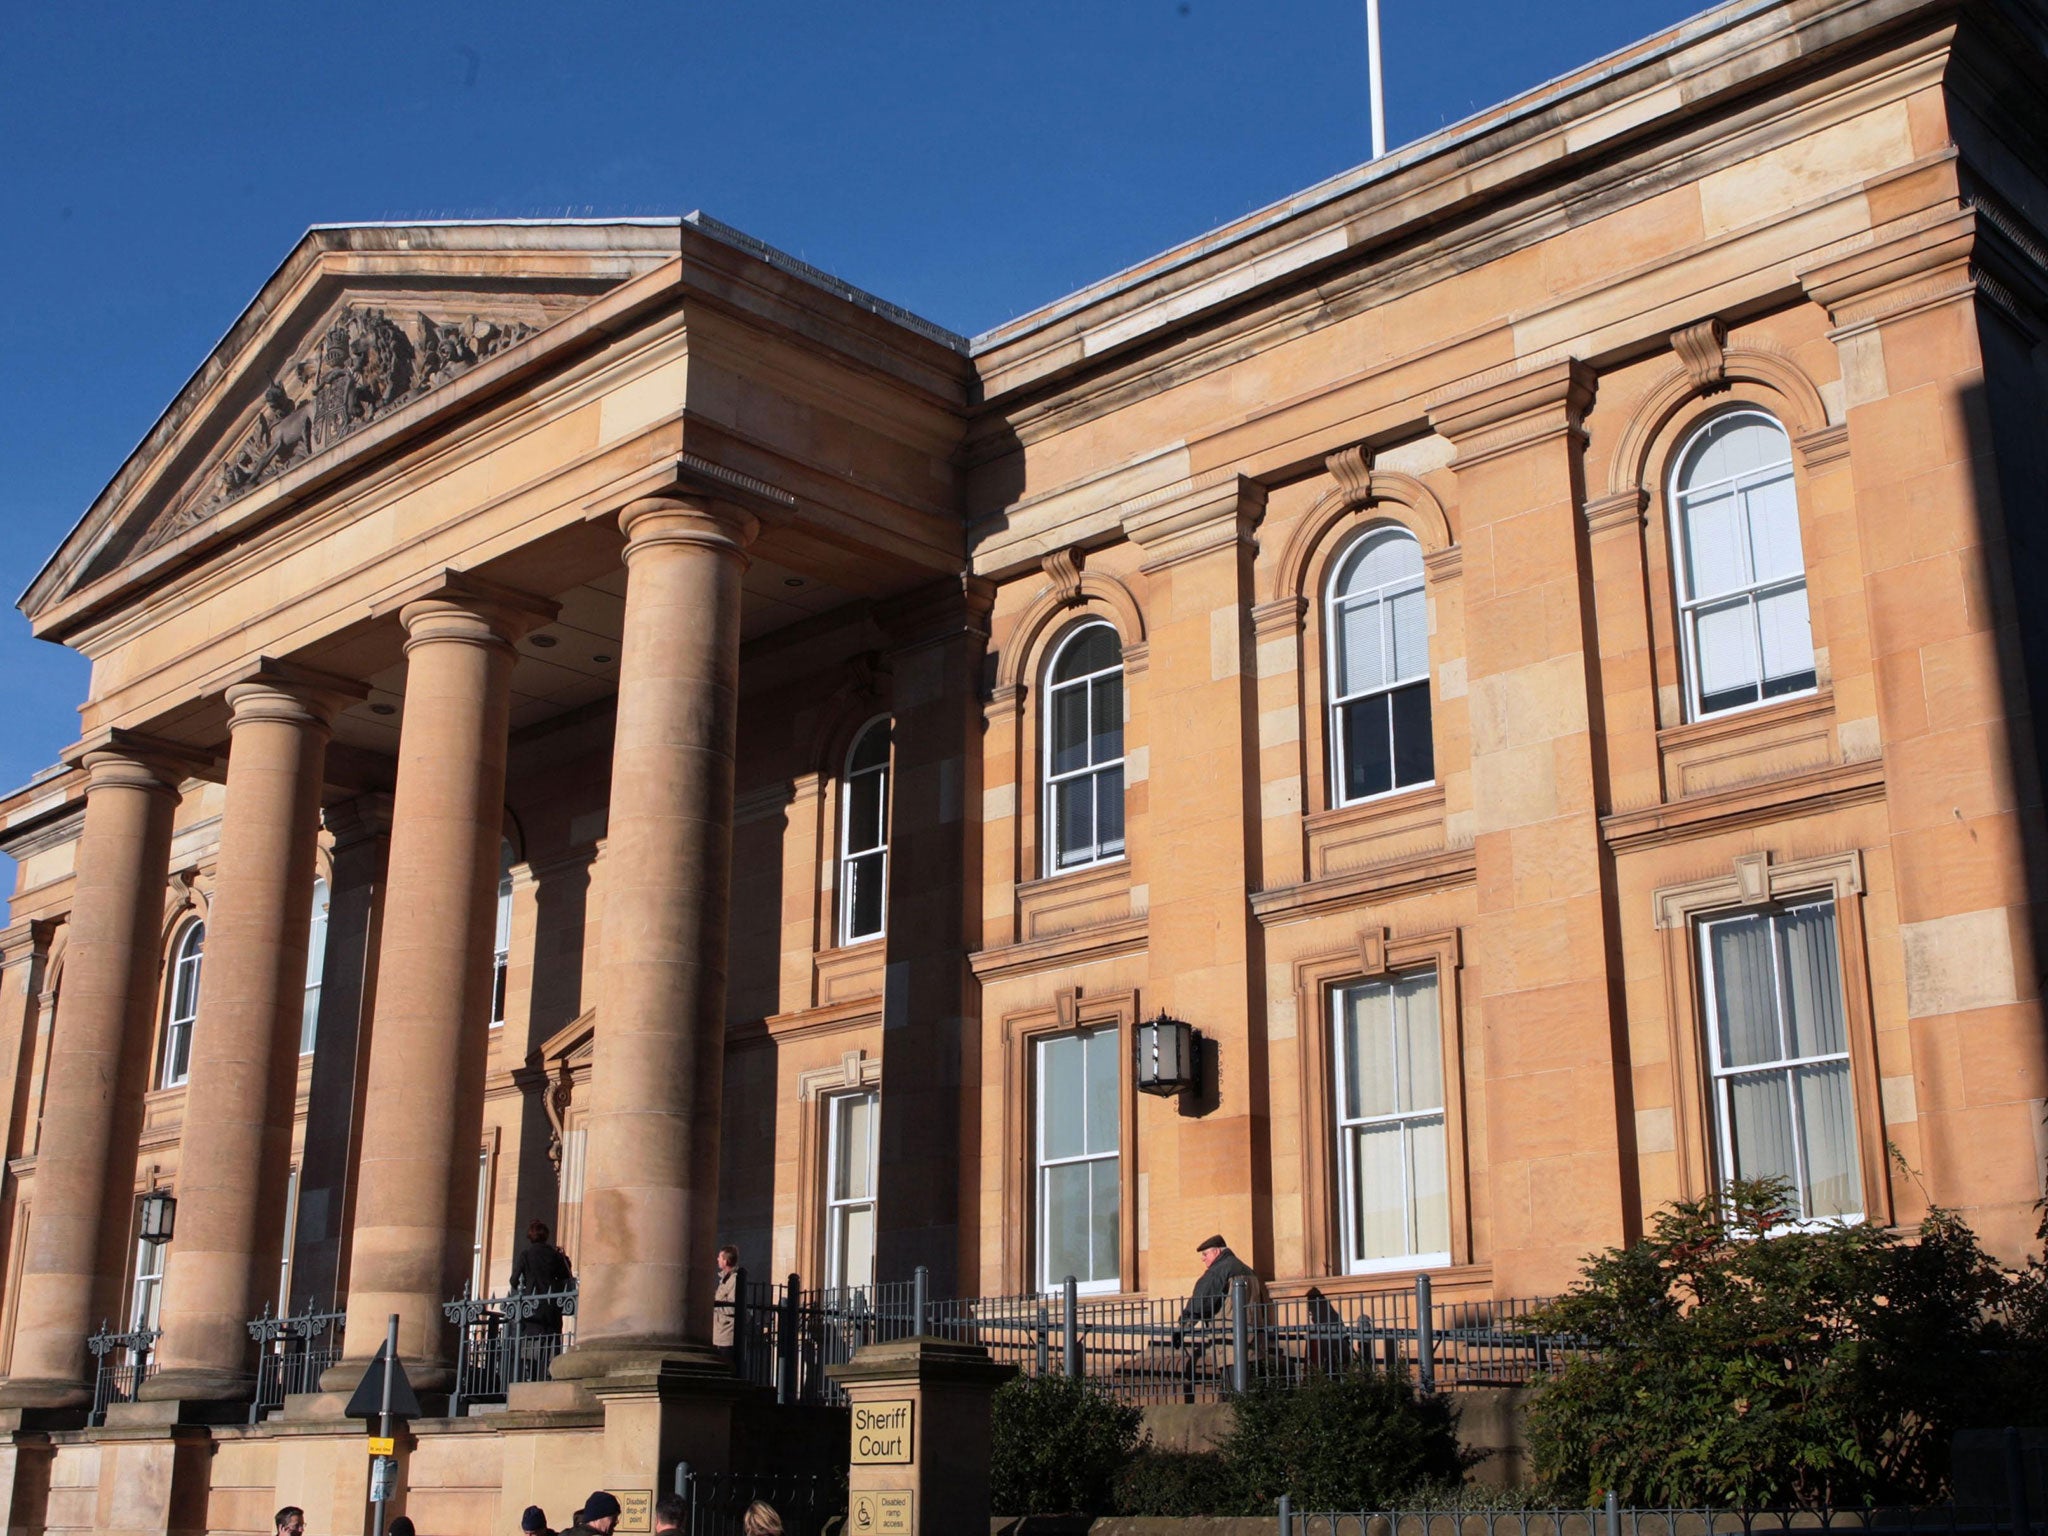 Thomas Dunn is on trial accused of assault at Dundee Sheriff Court